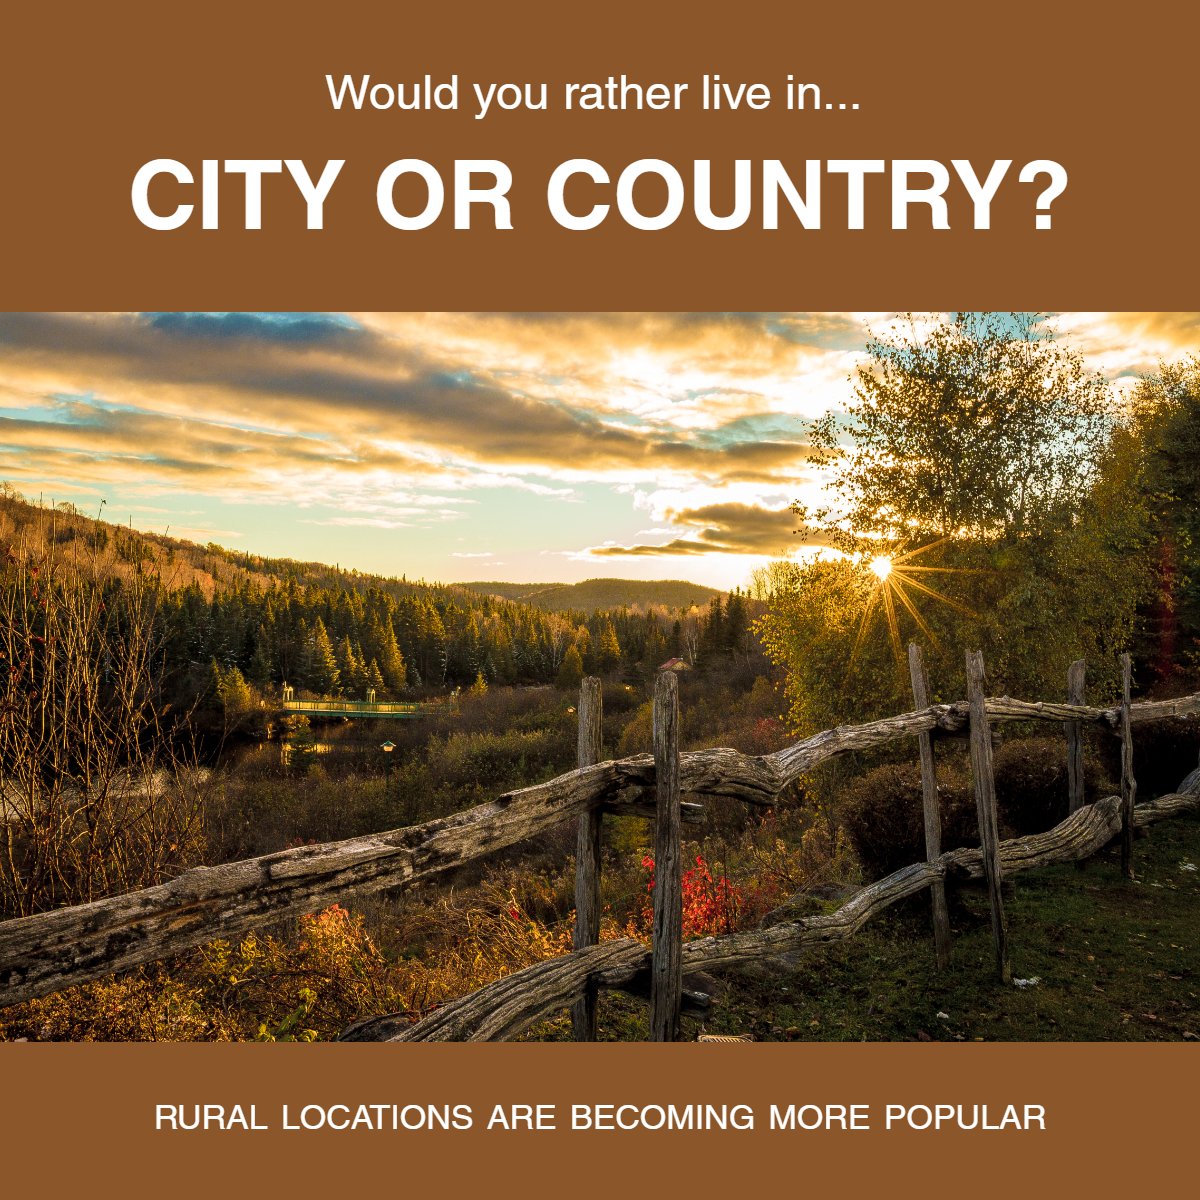 Would you rather live in the city or country? 🏙️🌄

#wouldyourather #cityorcountry #citylights #realestatequestion #realestate
 #jackyhoward #buylubbocktx #lubbocktxrealestate #jackysellstx #realtorjackyhoward #REALTORJacky